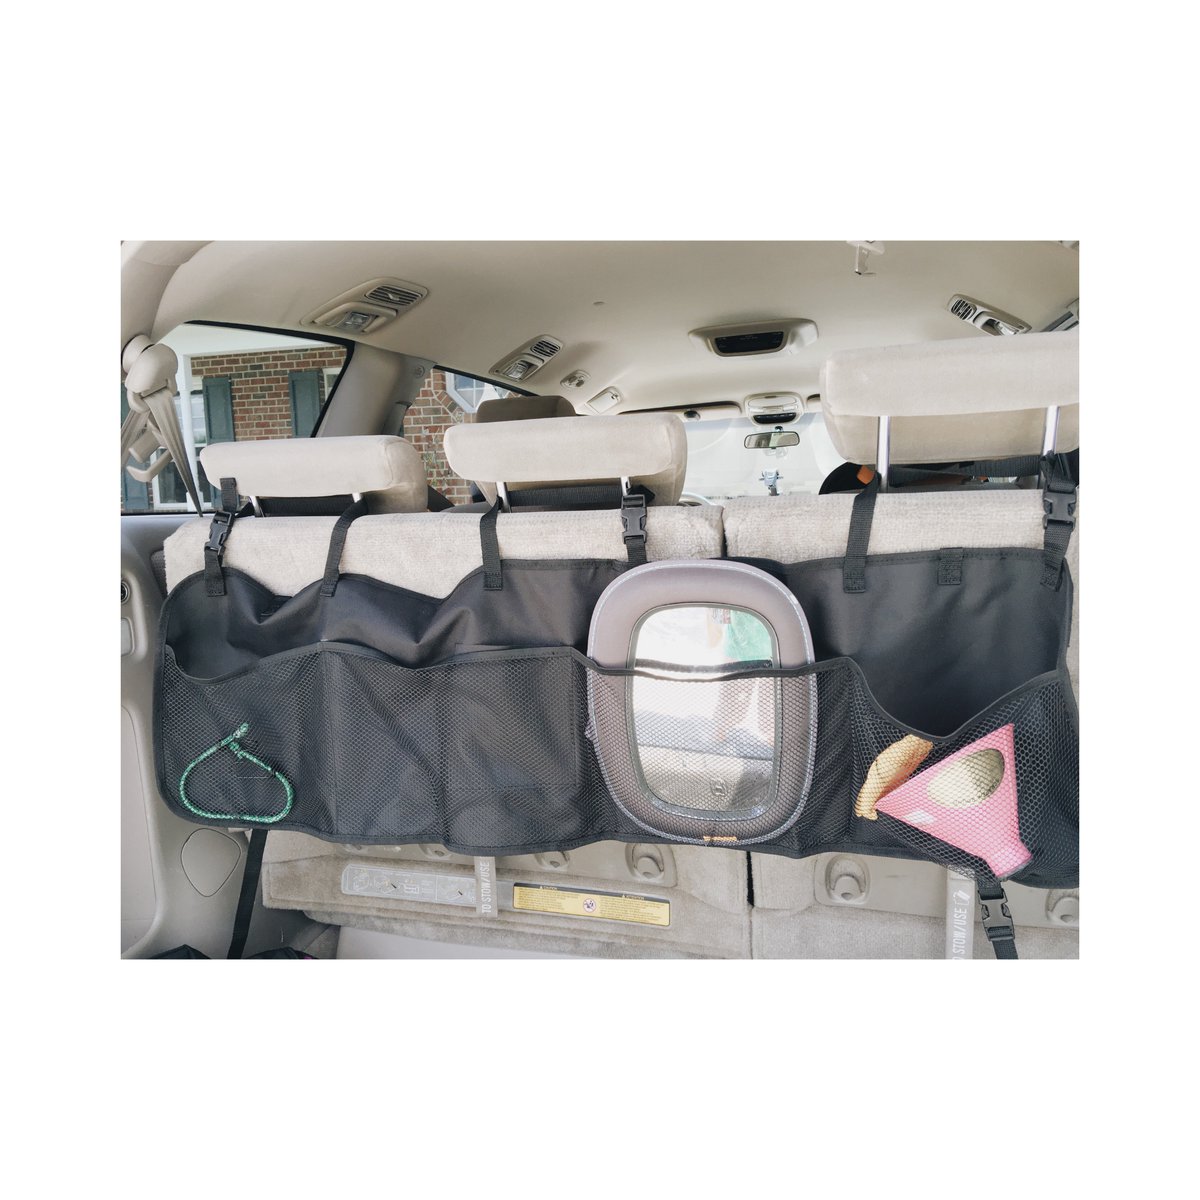 One less messy car. This car organizer helps me to store items on my car. It is easy to use and it can store various items. Highly recommended
amazon.com/gp/product/B07…
#carorganizer #car